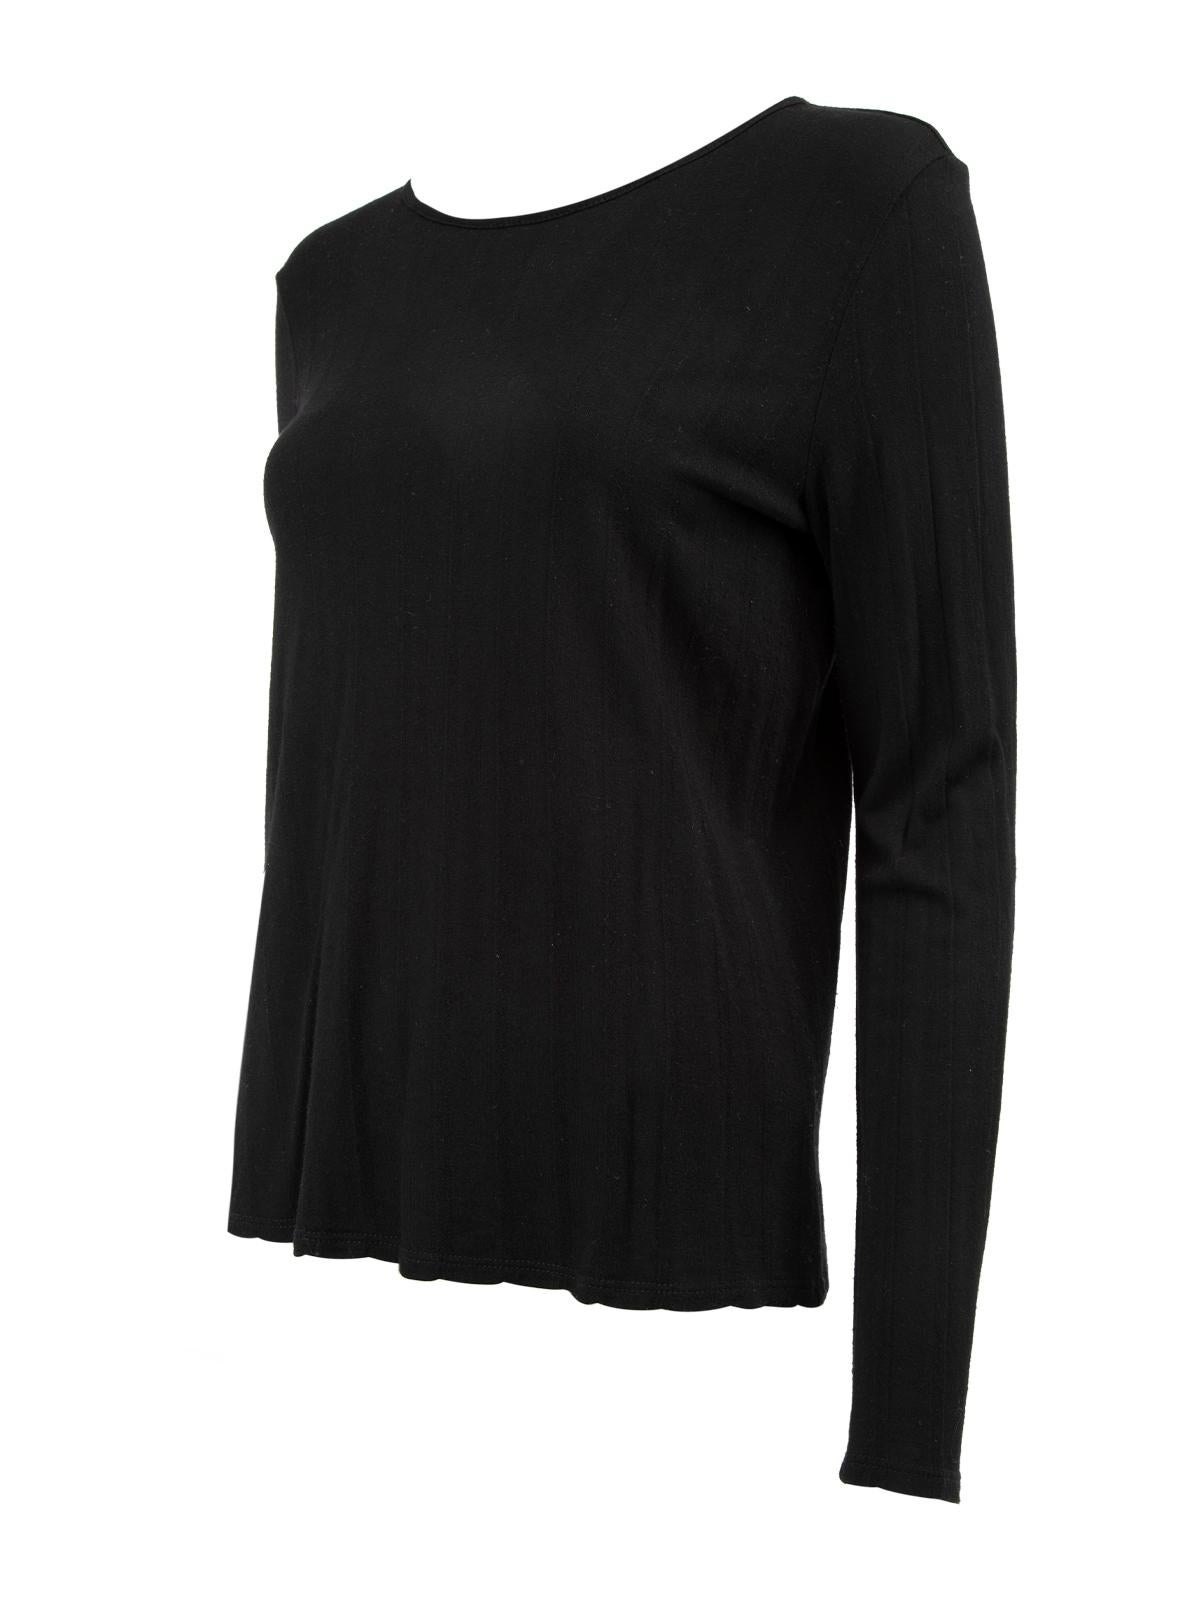 Women's Black Long Sleeve Top Size M For Sale